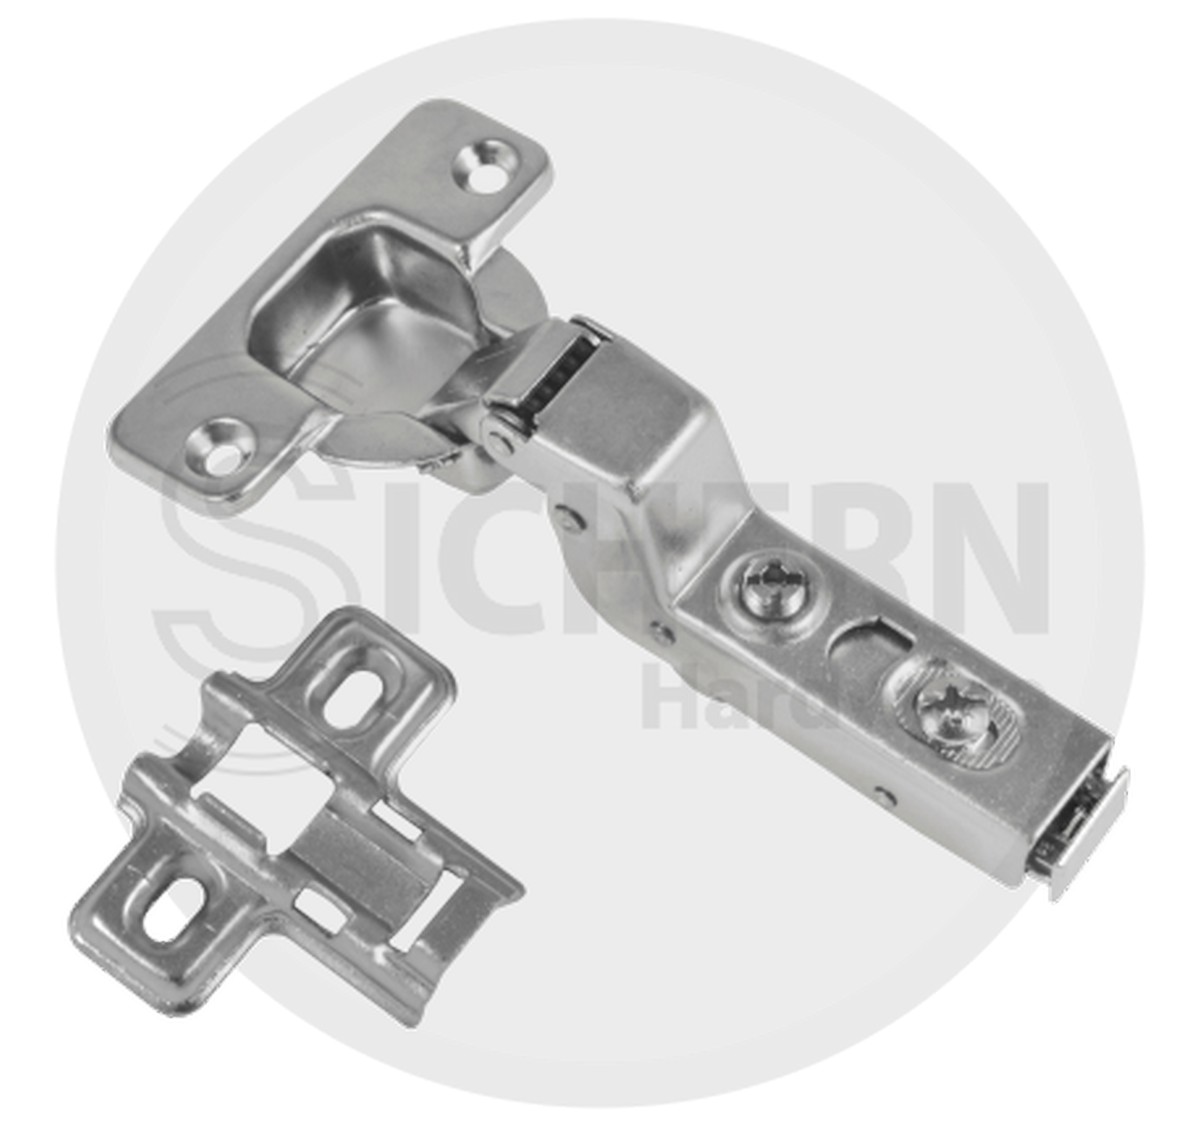 Flush Fit Sprung Cabinet Hinge Soft Close 35MM - Nickel Plated